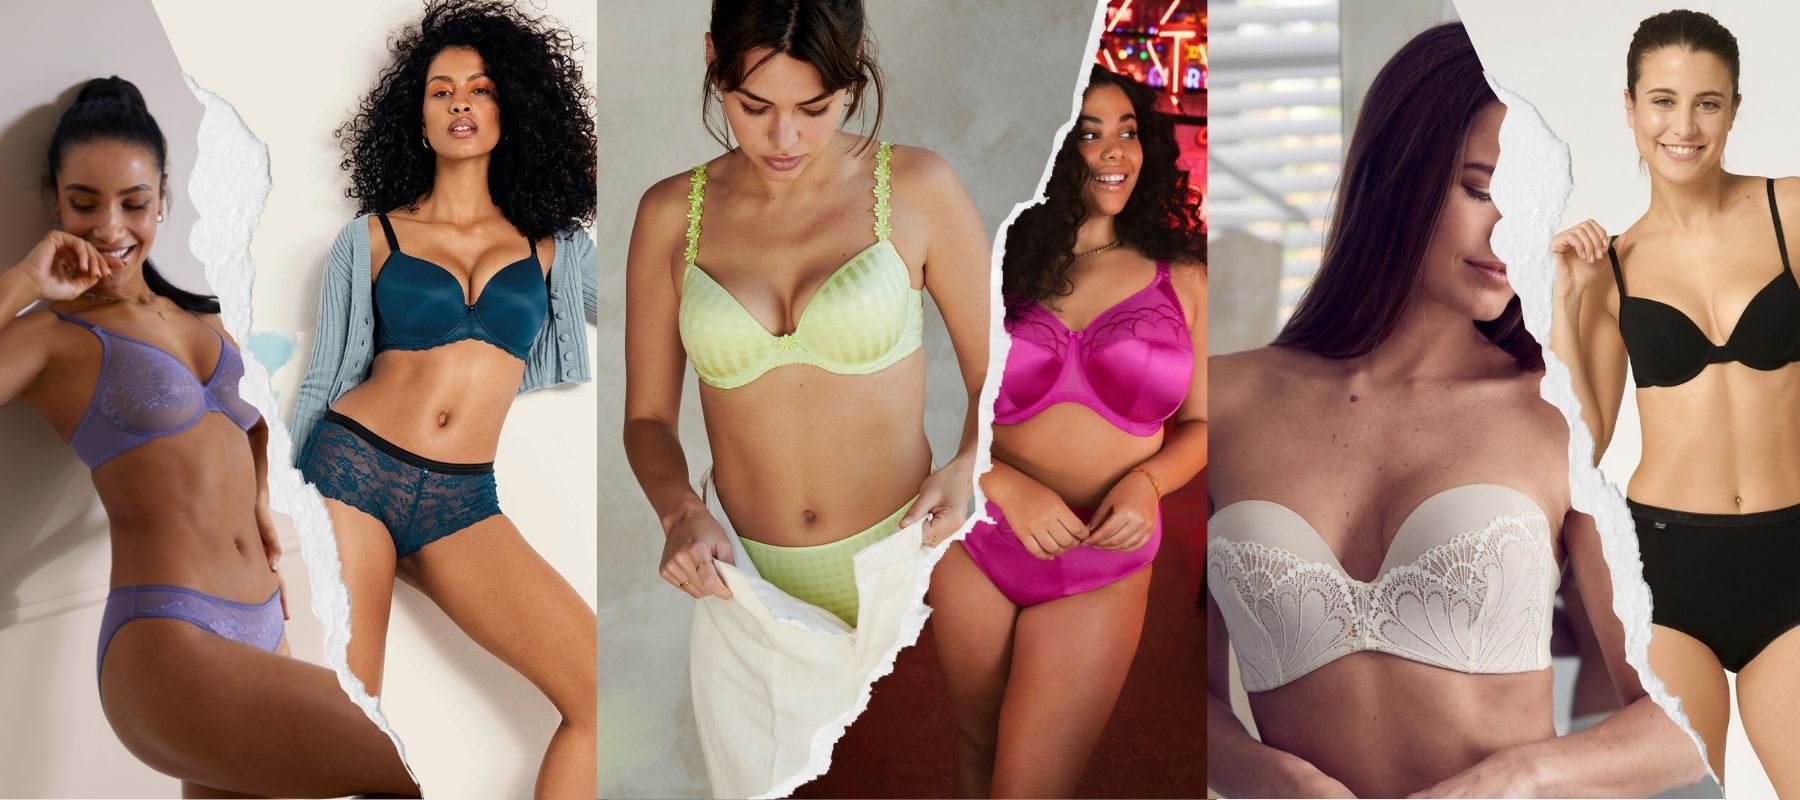 Lingerie Brand Glossary A-Z: What are the Best Lingerie Brands